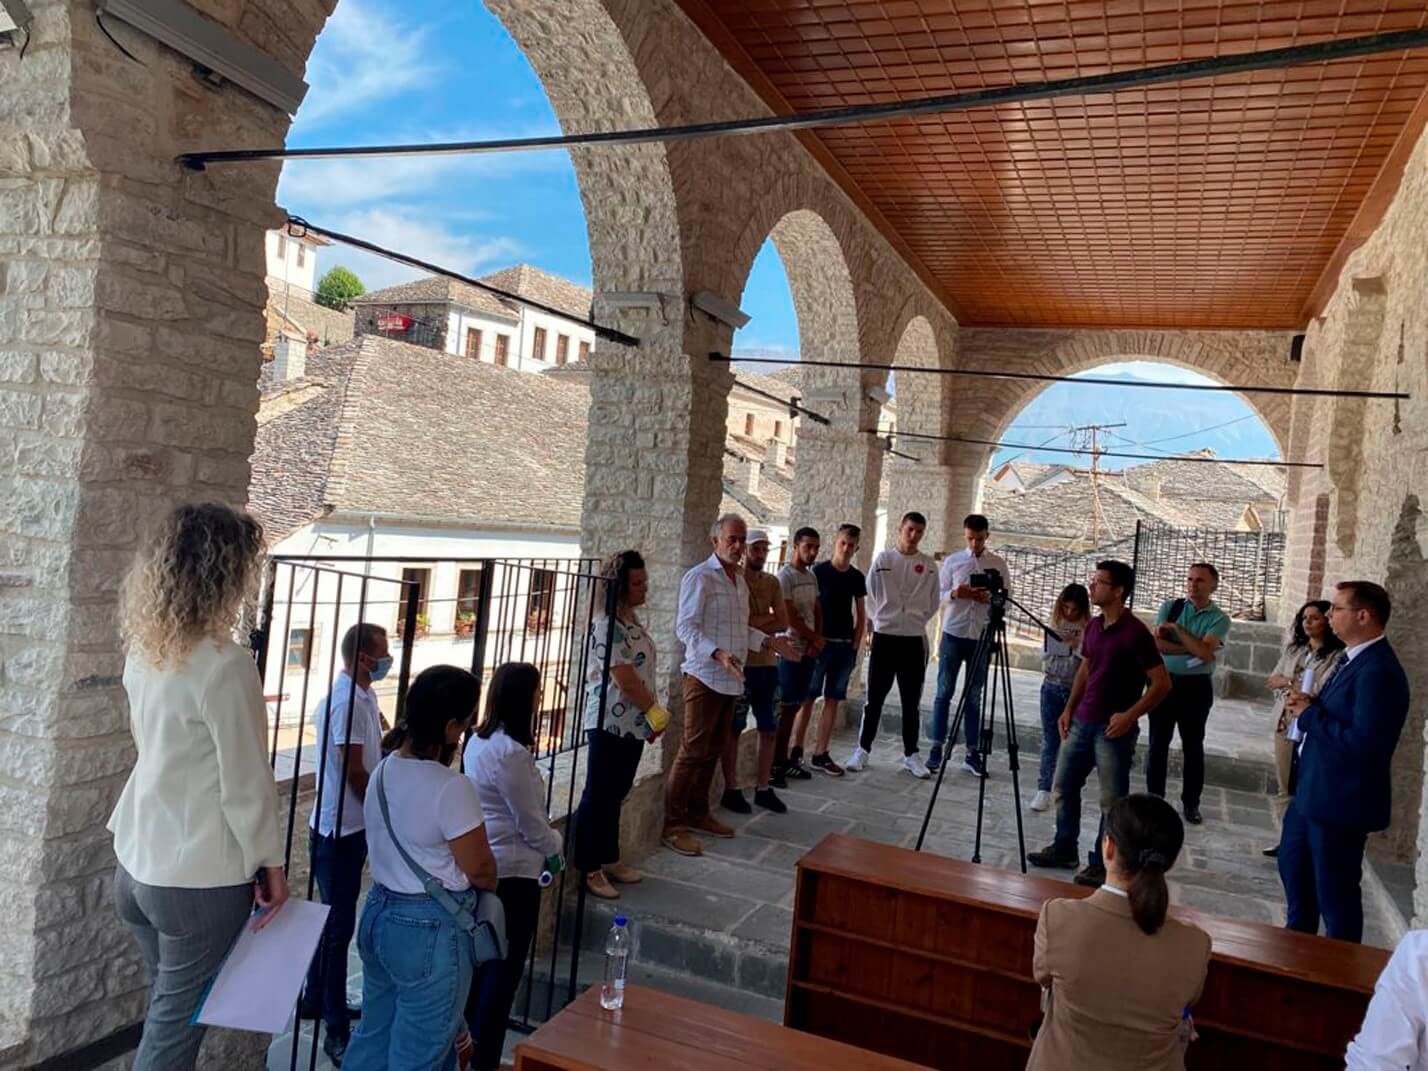 The tourism as key sector for the economy / Study visit to the cultural sites of Gjirokastra